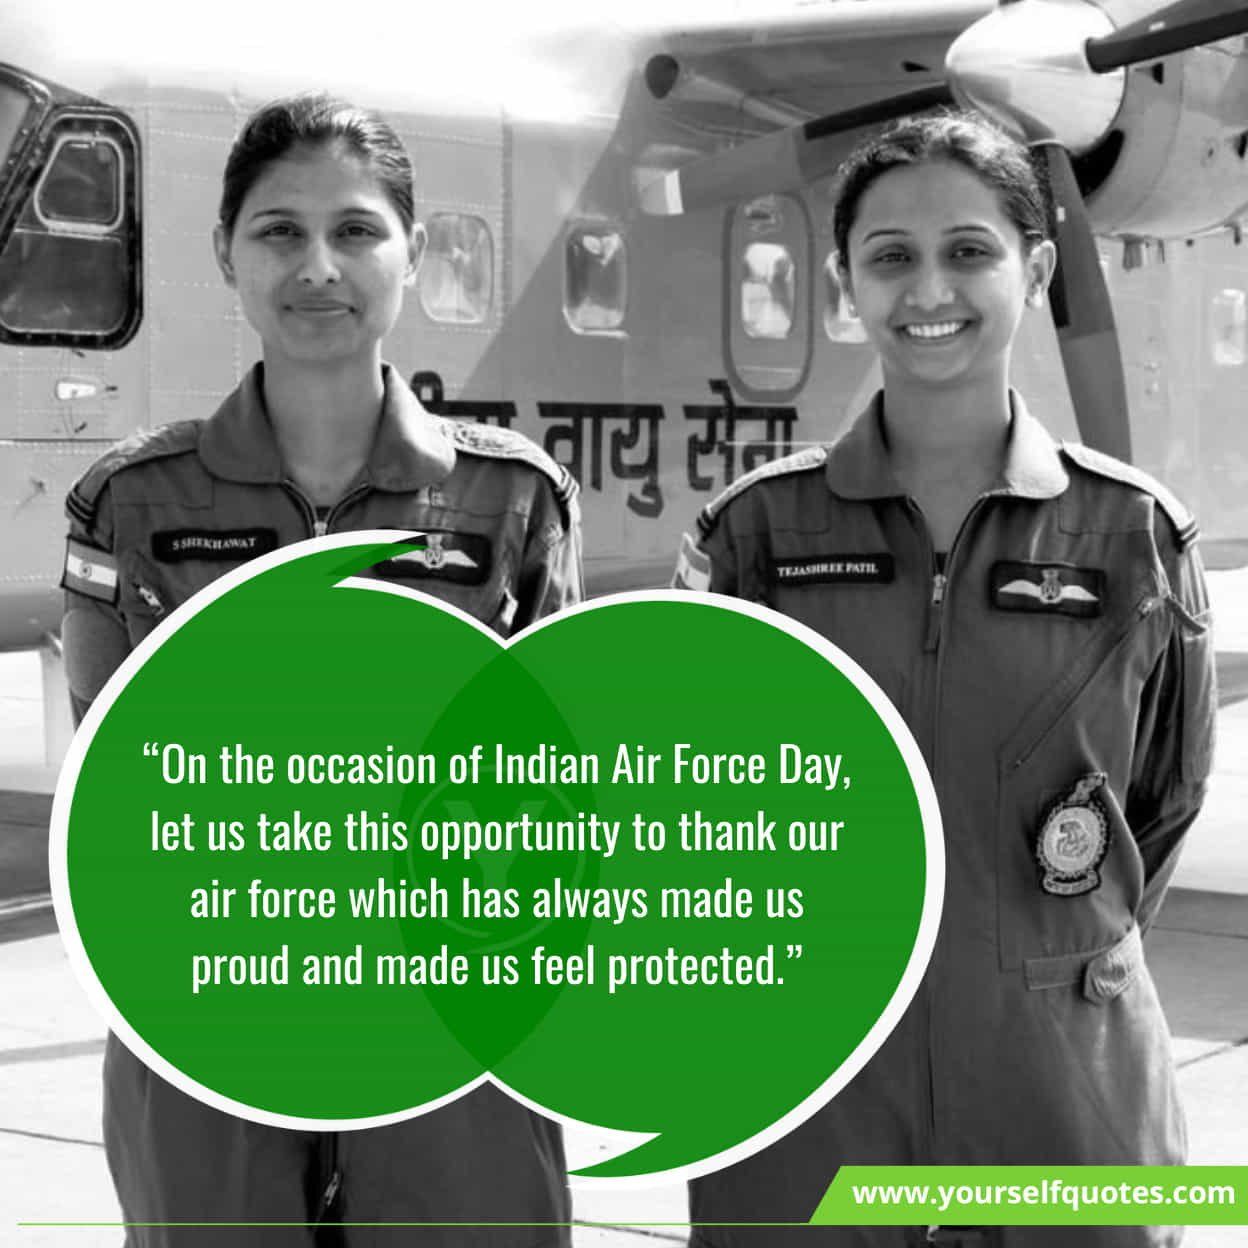 Indian Air Force Day Sayings & Greetings